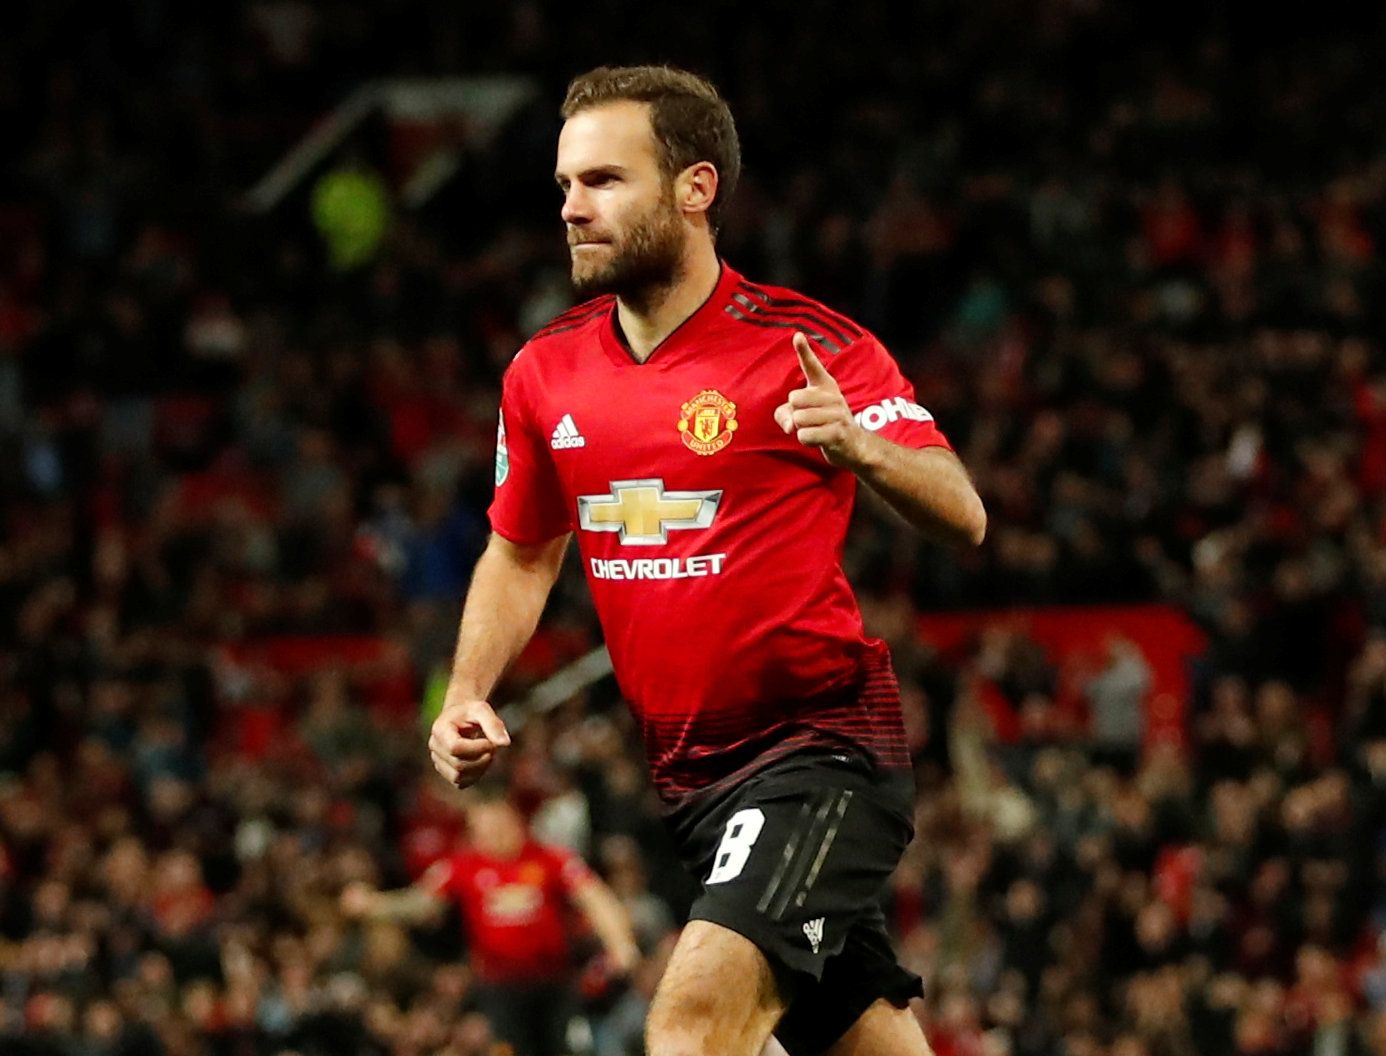 Soccer Football - Carabao Cup - Third Round - Manchester United v Derby County - Old Trafford, Manchester, Britain - September 25, 2018  Manchester United's Juan Mata celebrates scoring their first goal   Action Images via Reuters/Andrew Boyers  EDITORIAL USE ONLY. No use with unauthorized audio, video, data, fixture lists, club/league logos or "live" services. Online in-match use limited to 75 images, no video emulation. No use in betting, games or single club/league/player publications.  Pleas